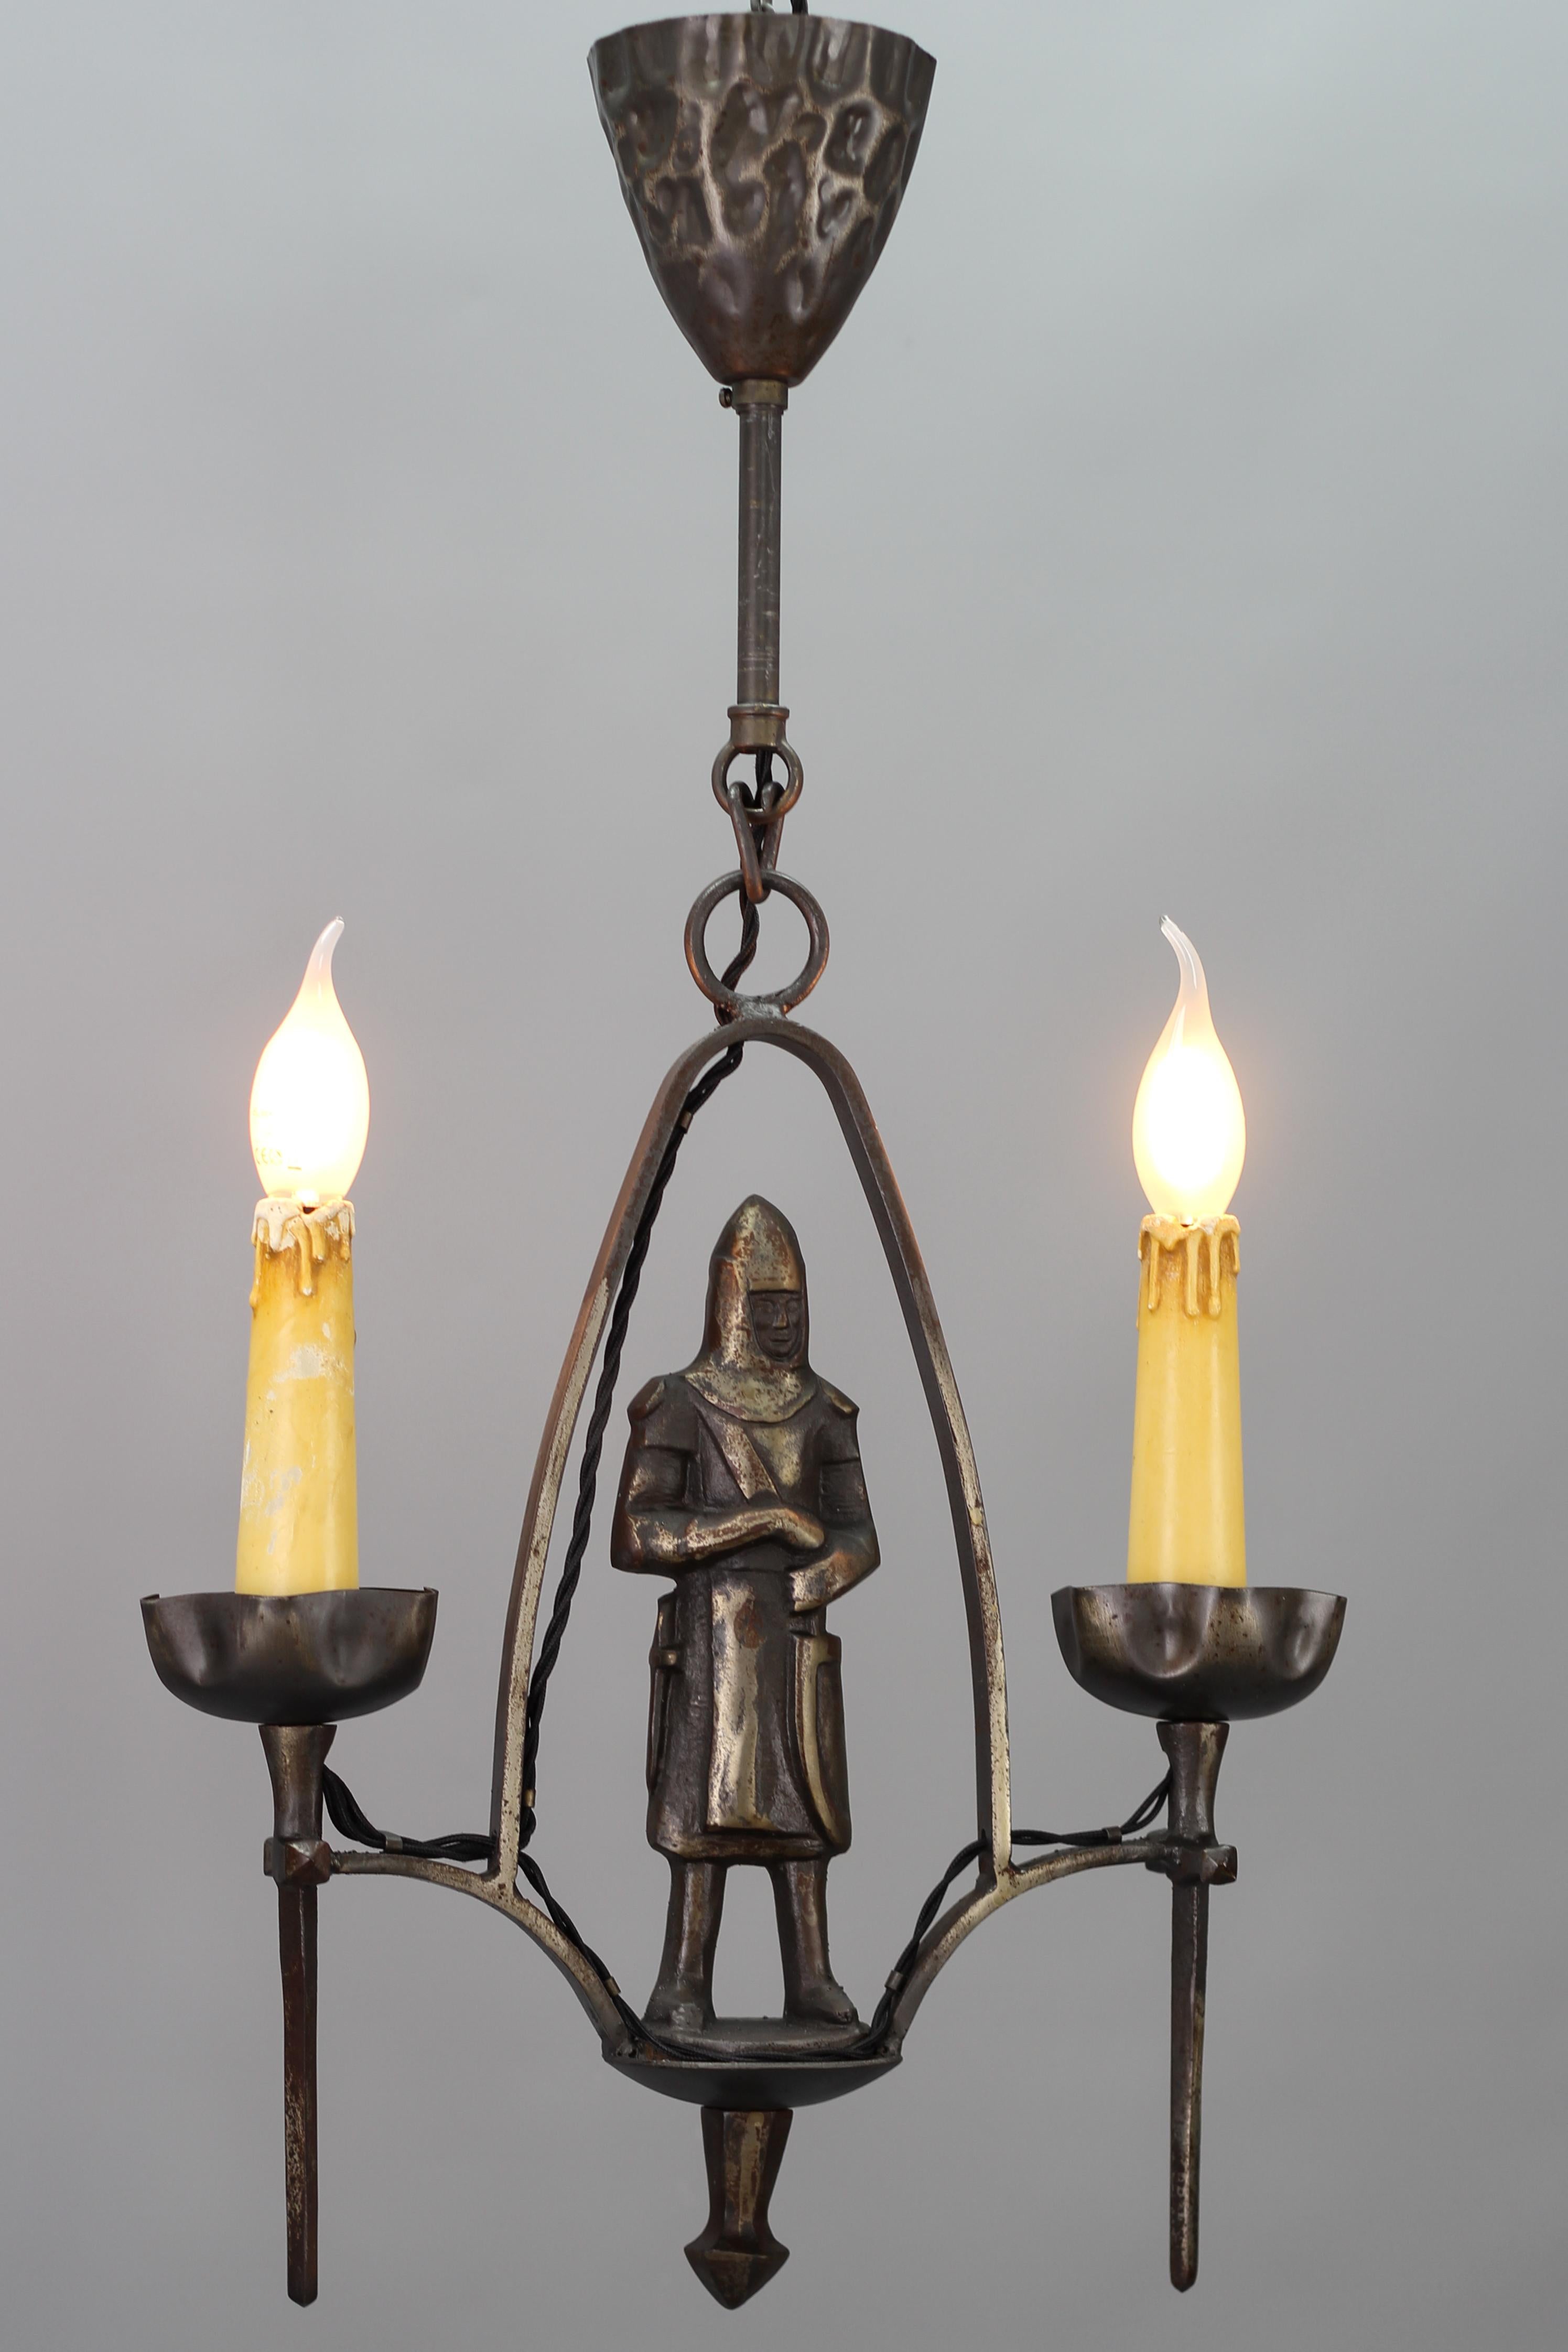 Gothic Revival style wrought iron and metal two-light chandelier with knight, France, circa the 1950s.
This amazing wrought iron and bronzed metal pendant chandelier features the figure of a knight in the center of the light fixture and two arms in